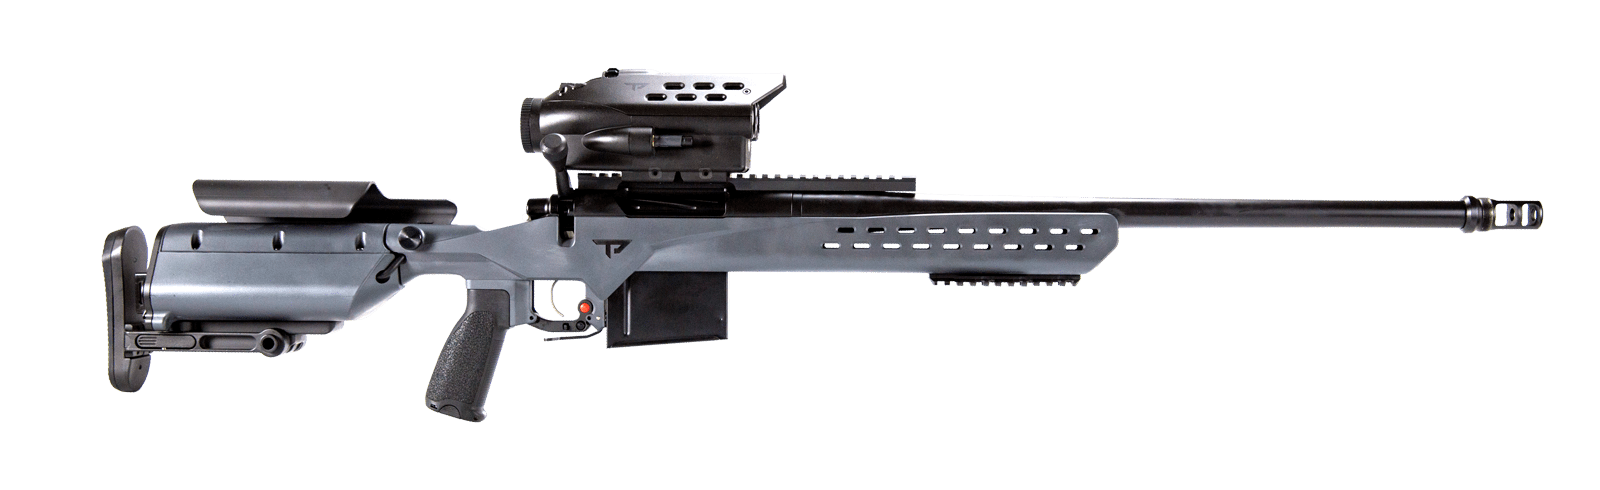 338 Lapua Magnum bolt action rifle - the ShadowTrax8 by TrackingPoint.